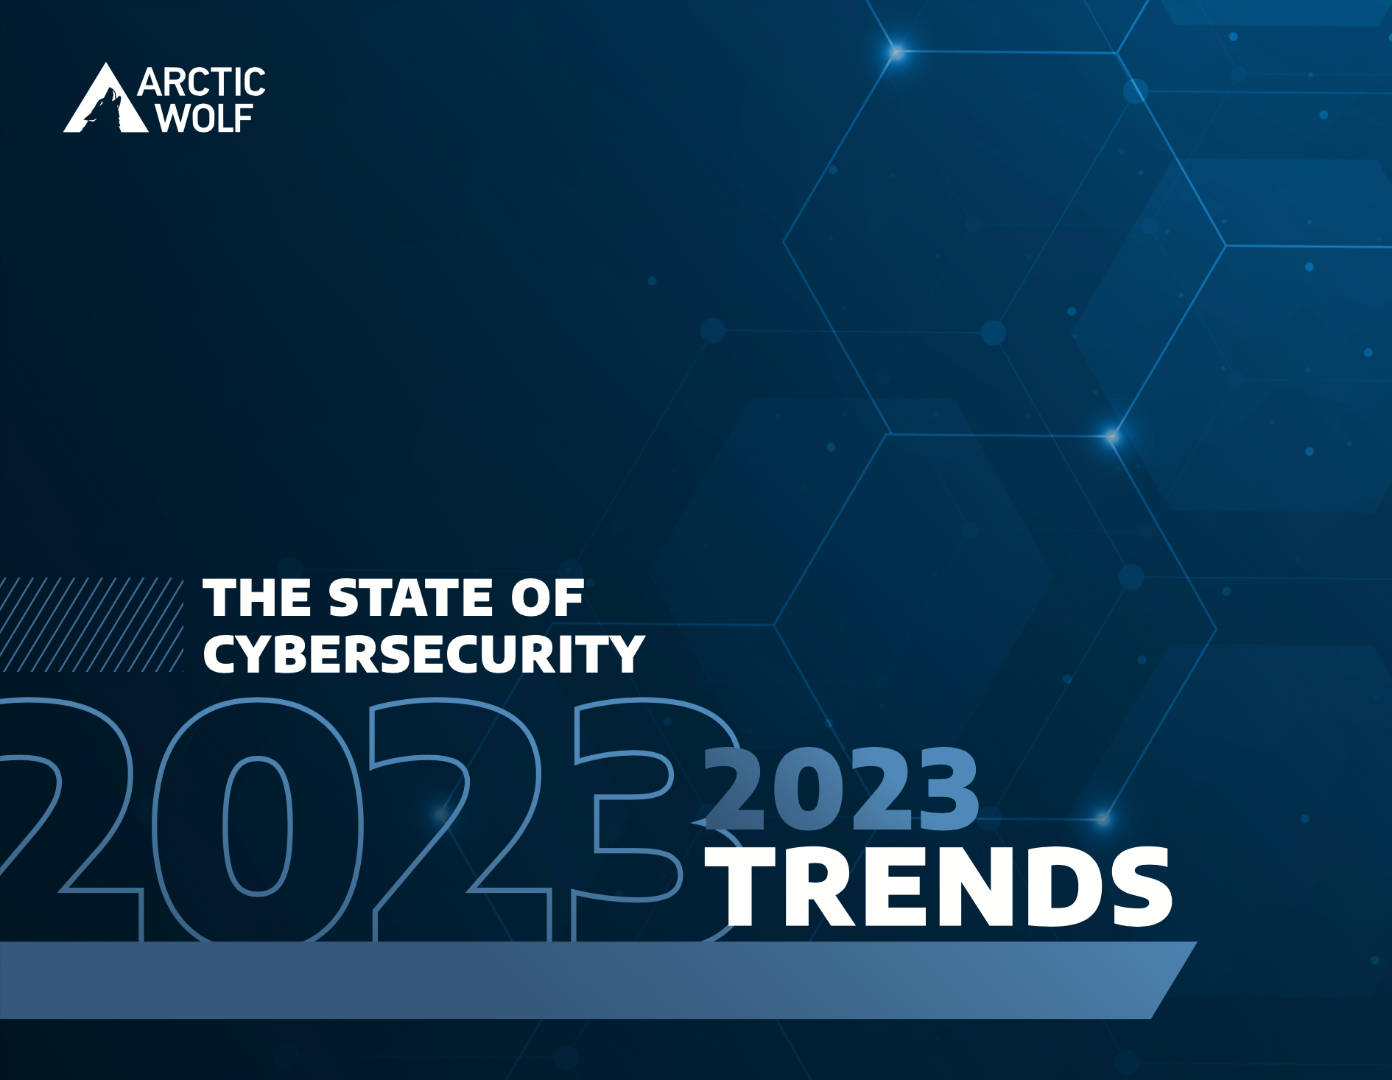 The State of Cybersecurity 2023 by Arctic Wolf